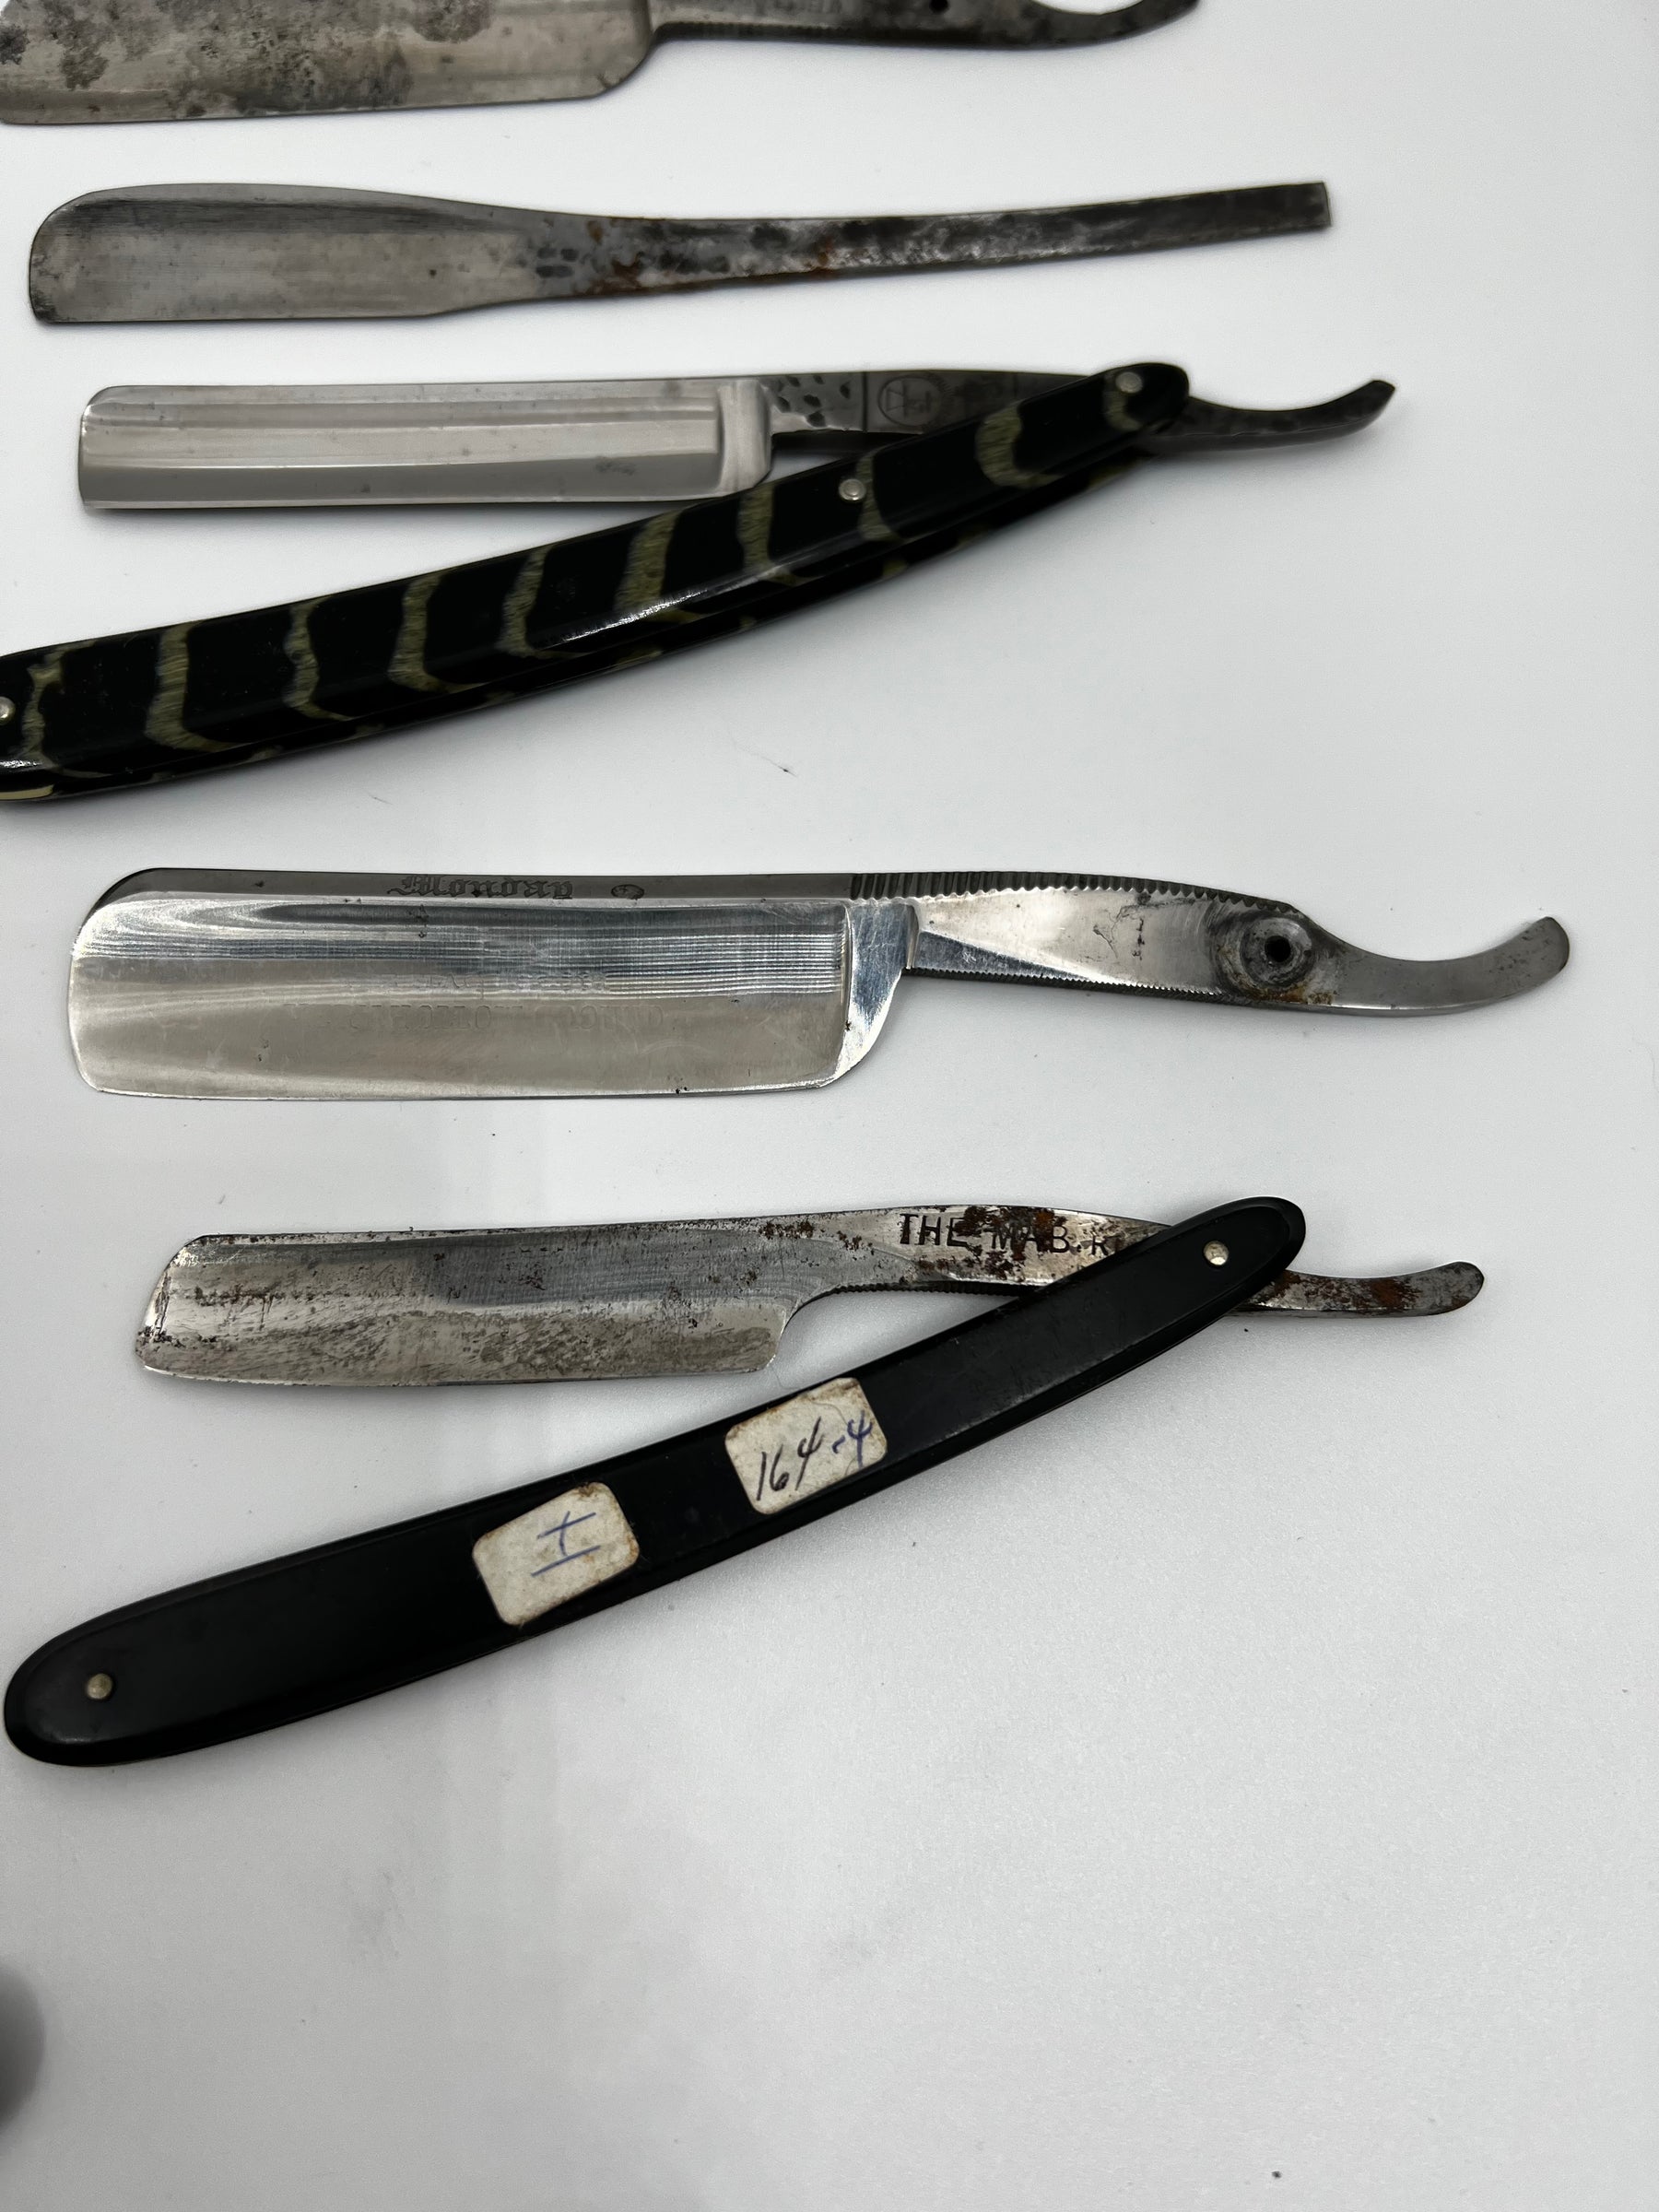 Vintage 10 Straight Razor Lot #6 - May Contain Sheffield, Solingen, Japanese & USA makers, as pictured